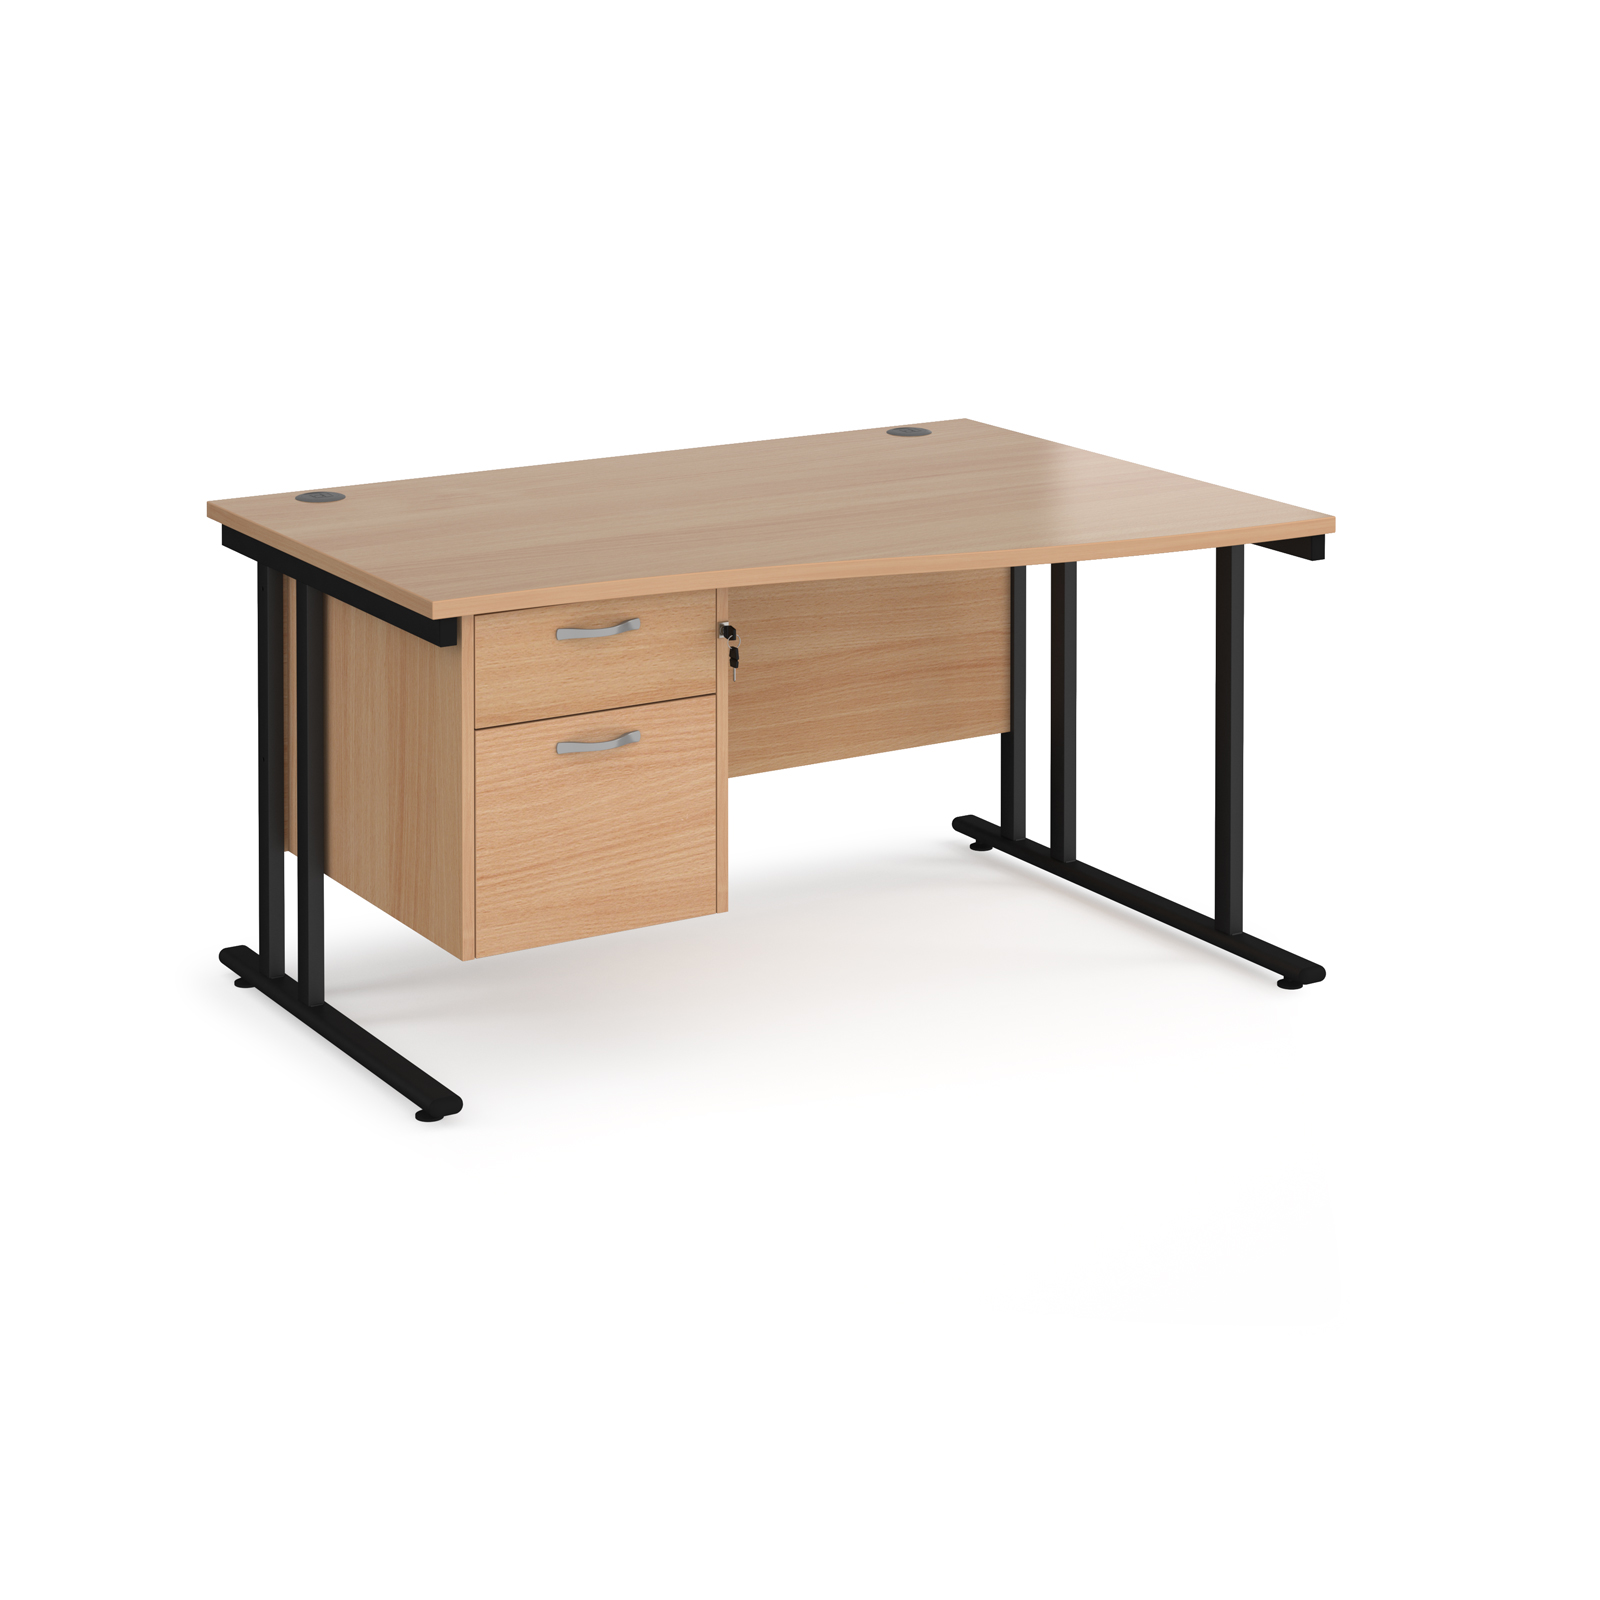 Maestro 25 right hand wave desk 1400mm wide with 2 drawer pedestal - black cantilever leg frame, beech top